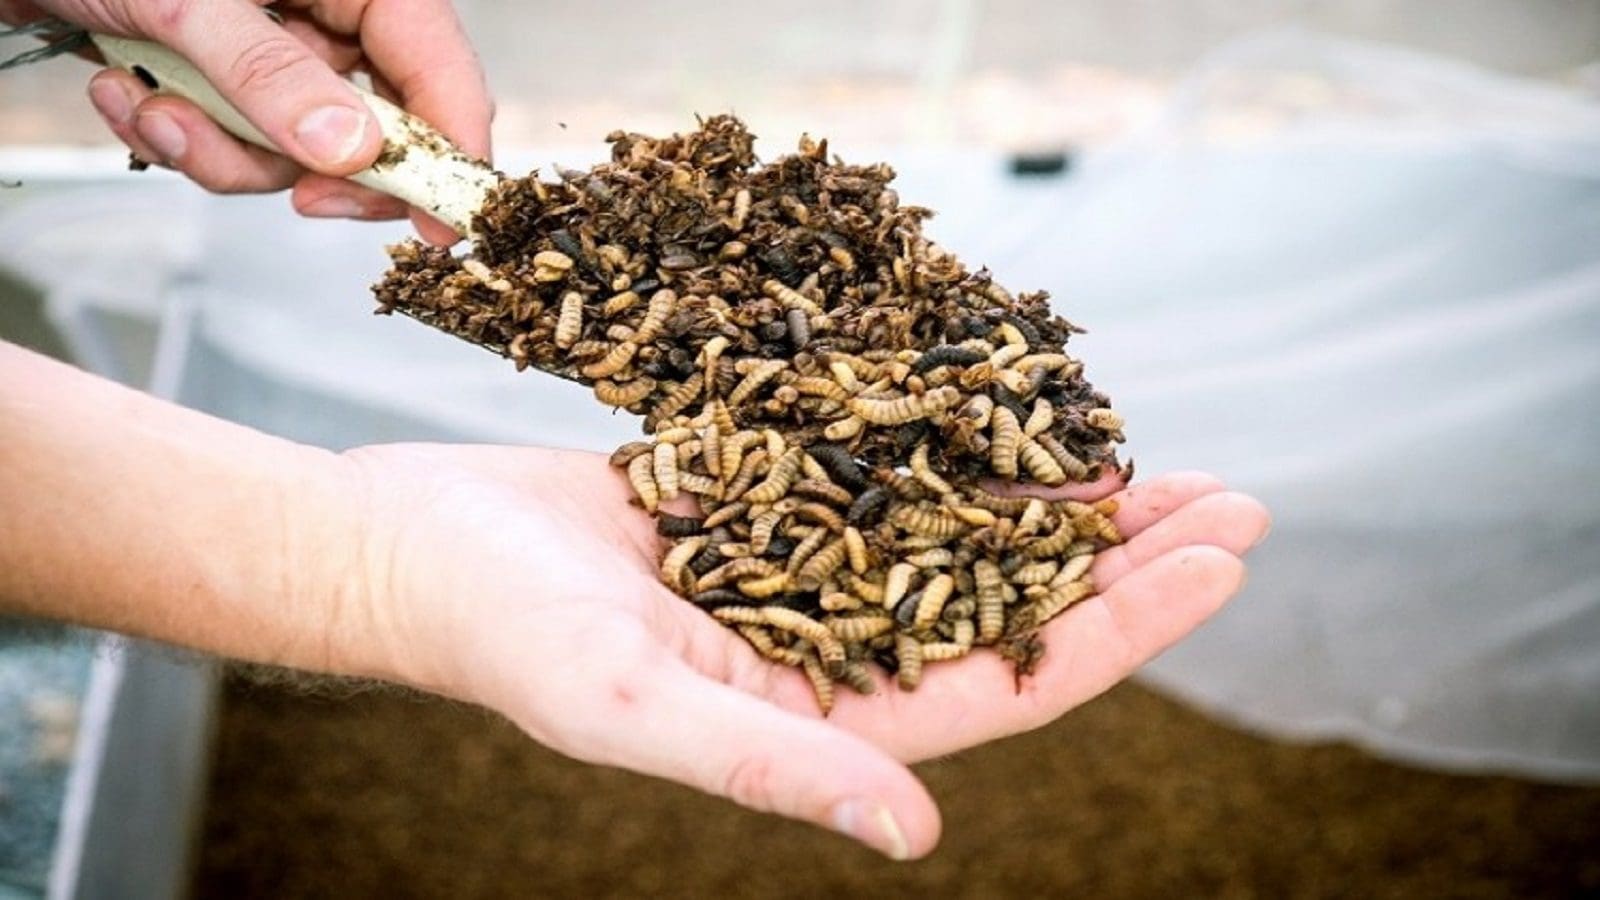 Enorm Biofactory unveils Northern Europe’s largest insect factory in Denmark